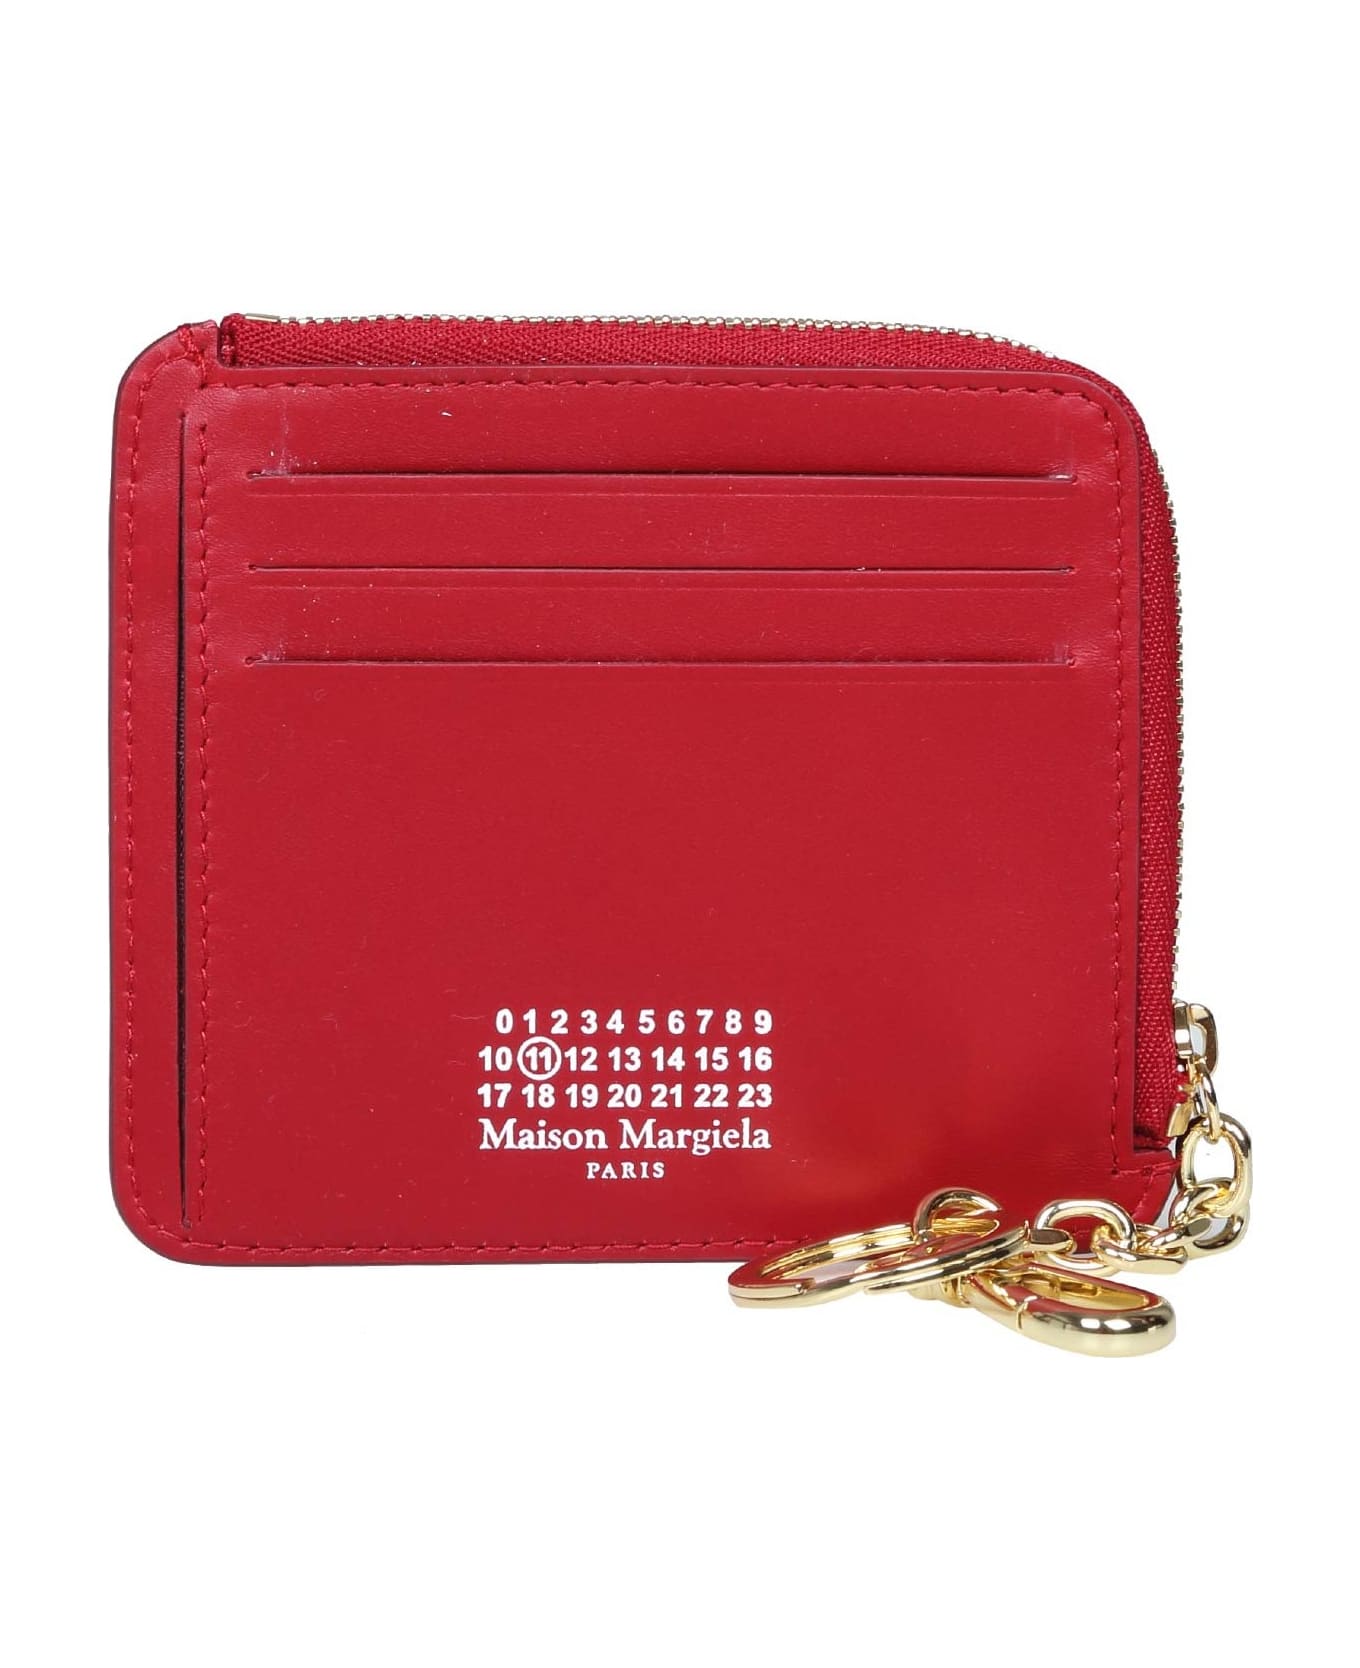 Maison Margiela Leather Key Chain Wallet Color Red - Red